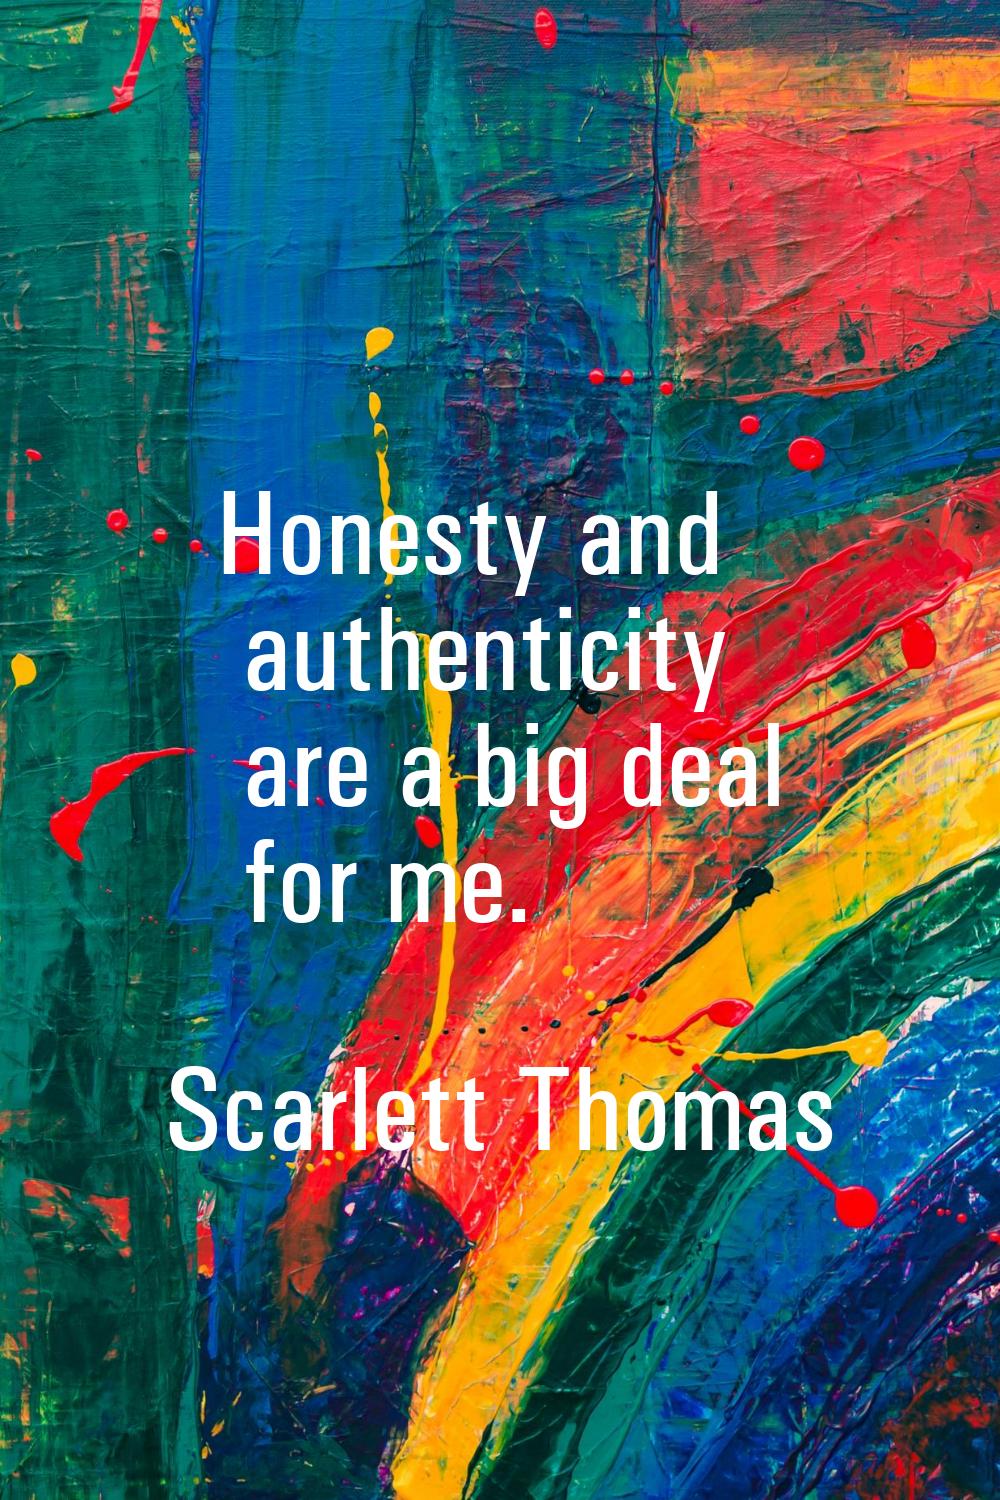 Honesty and authenticity are a big deal for me.